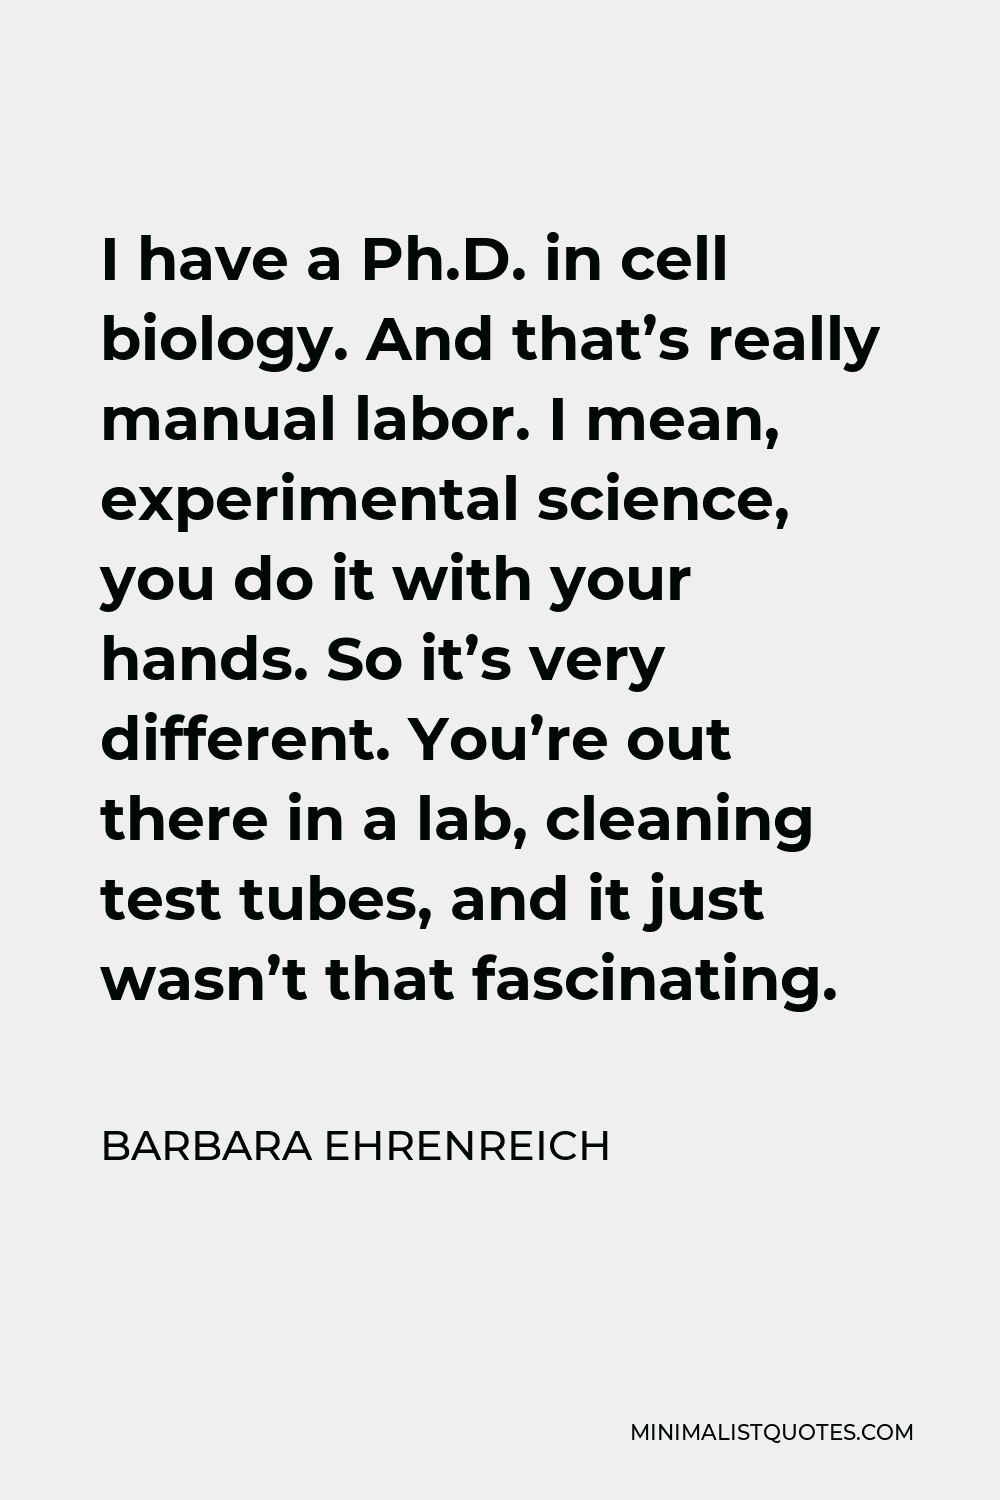 Barbara Ehrenreich Quote - I have a Ph.D. in cell biology. And that’s really manual labor. I mean, experimental science, you do it with your hands. So it’s very different. You’re out there in a lab, cleaning test tubes, and it just wasn’t that fascinating.